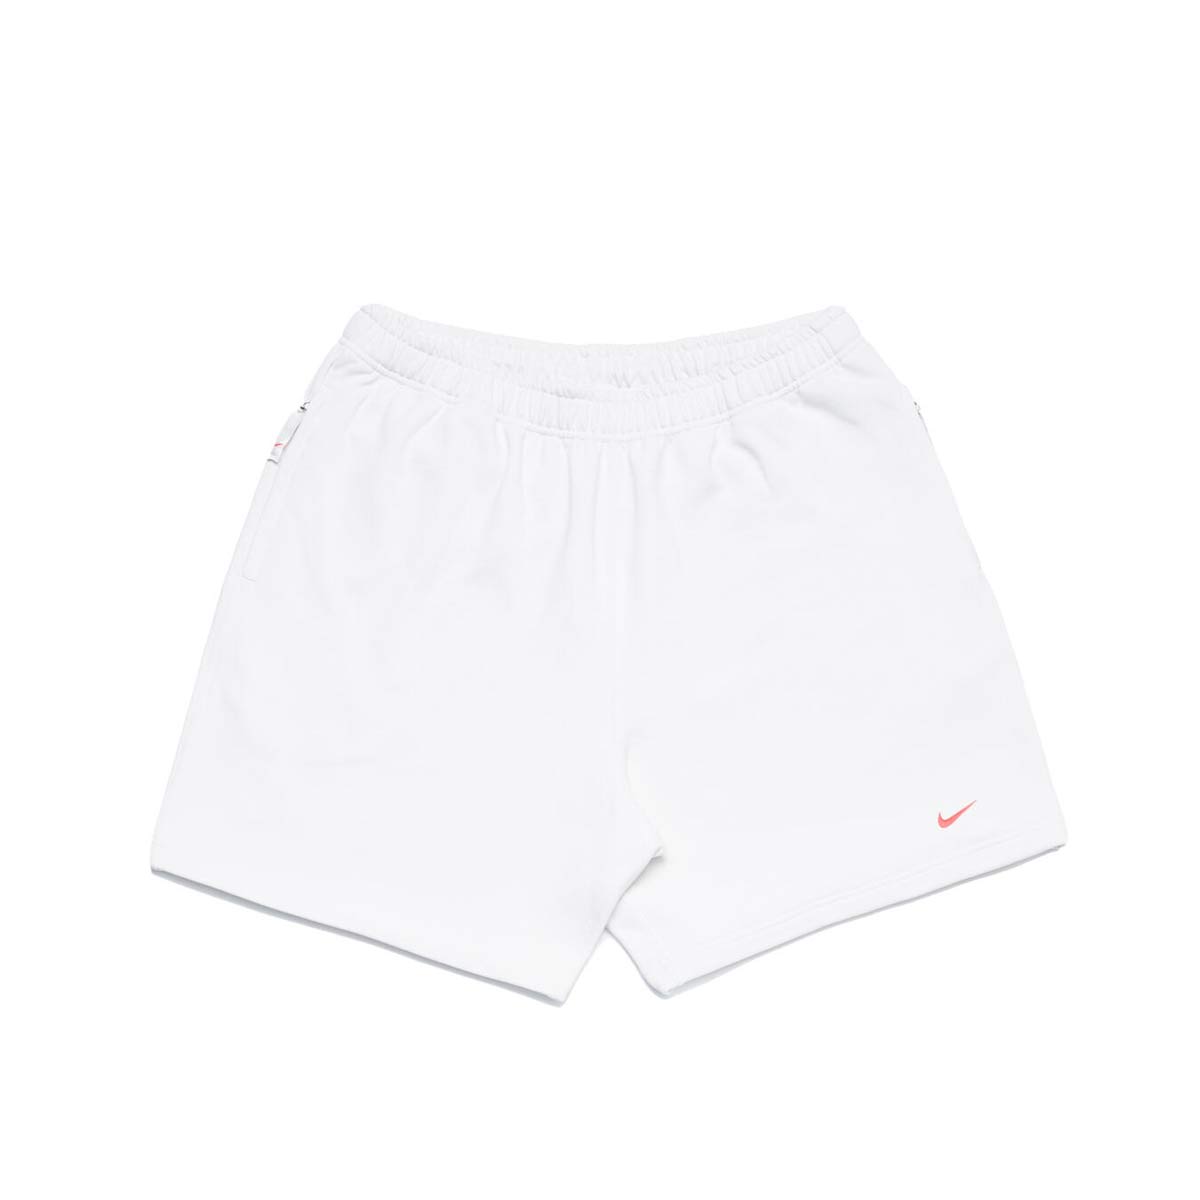 Nlab Solo Swoosh Franche Terry Short